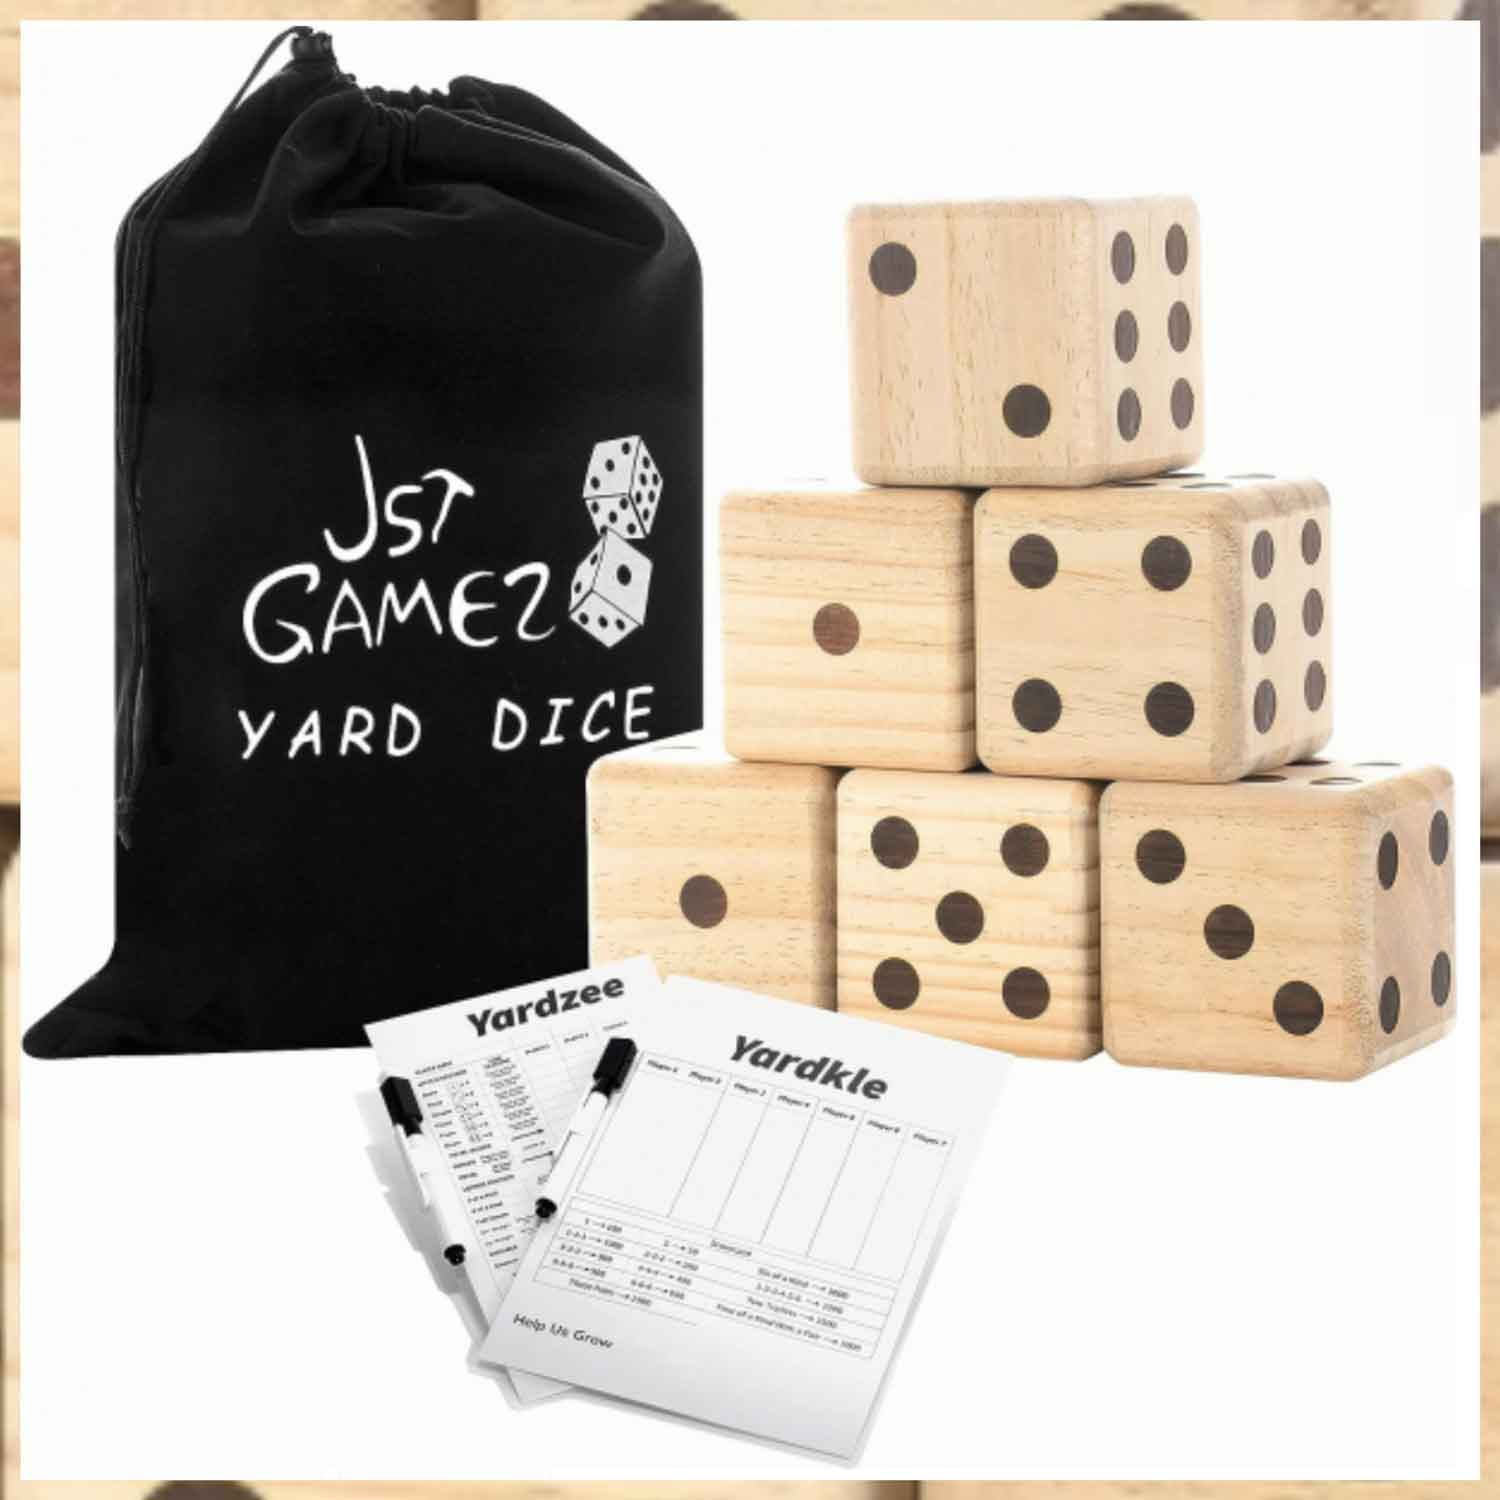 The link to this Library of Things Giant Wooden Dice catalog item will open in an external site and in a new tab or window.